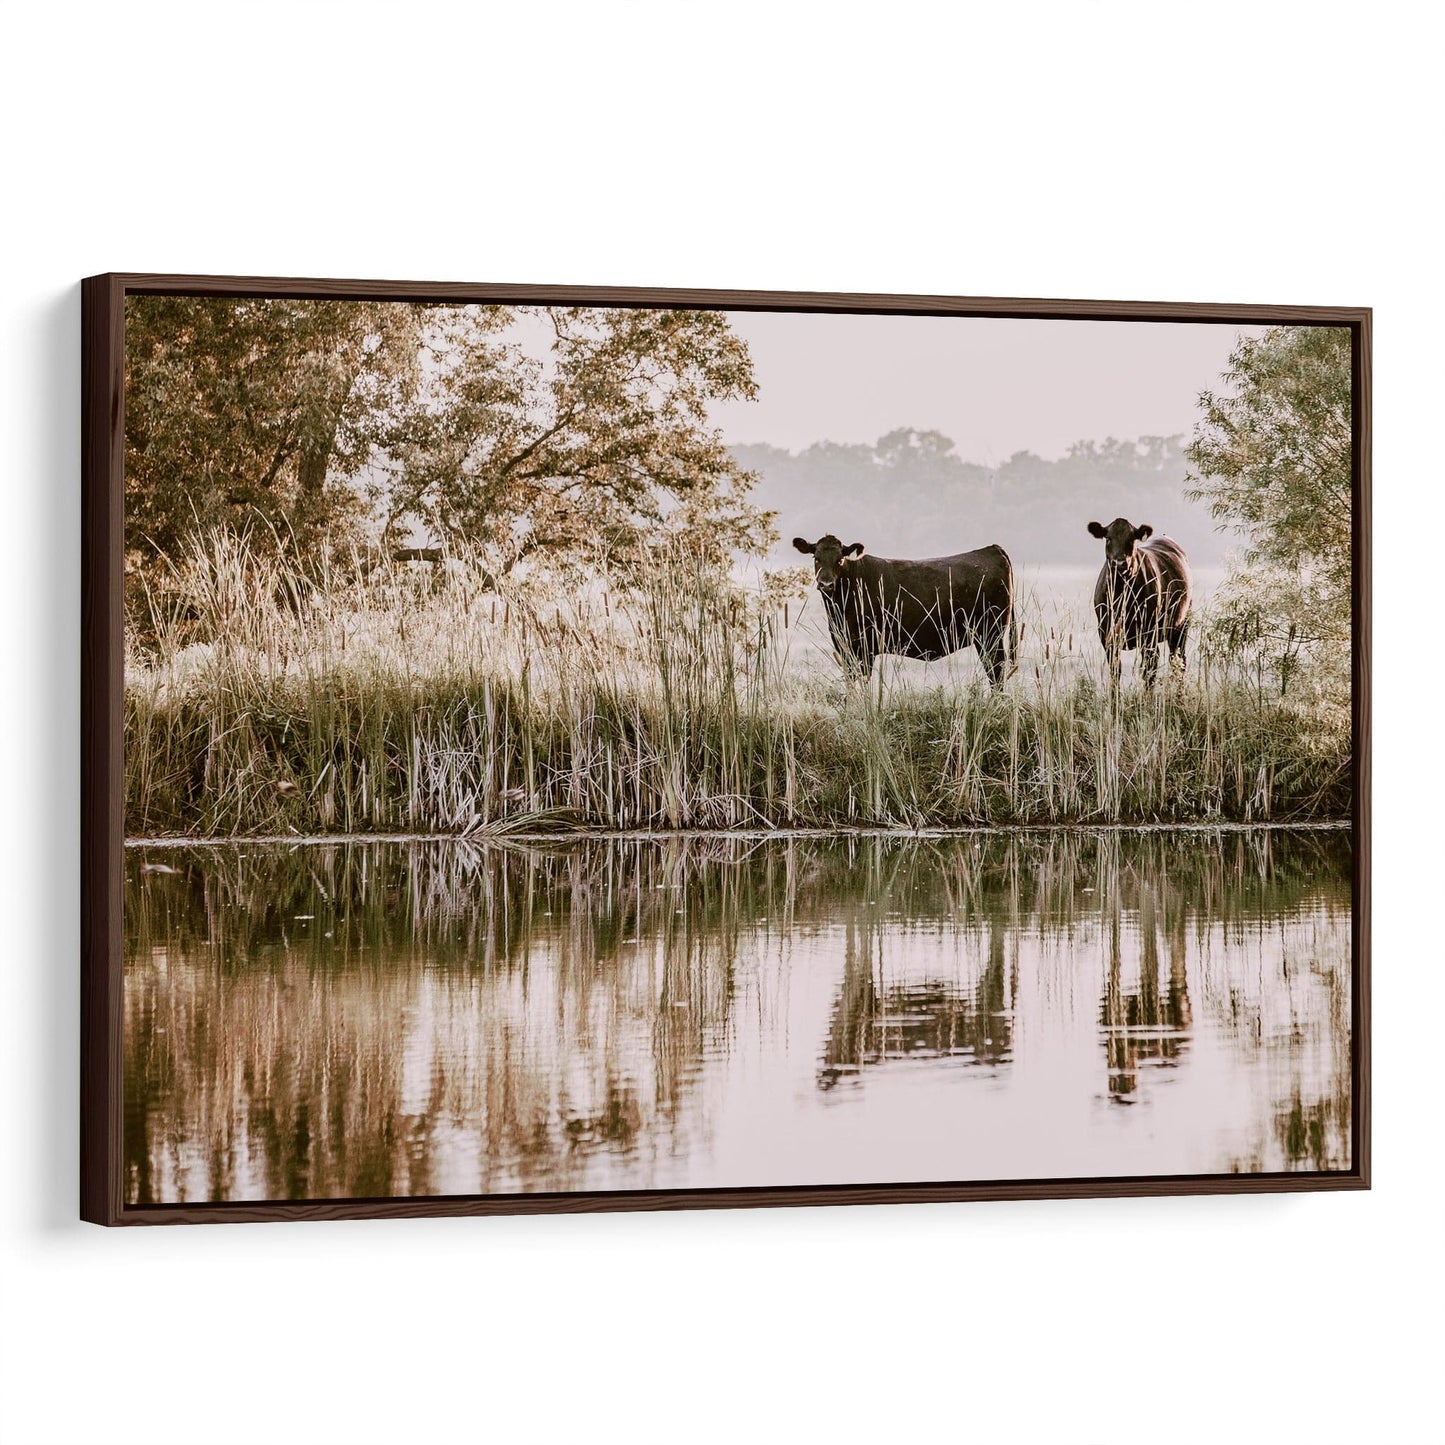 Black Angus Cattle Wall Art Canvas-Walnut Frame / 12 x 18 Inches Wall Art Teri James Photography